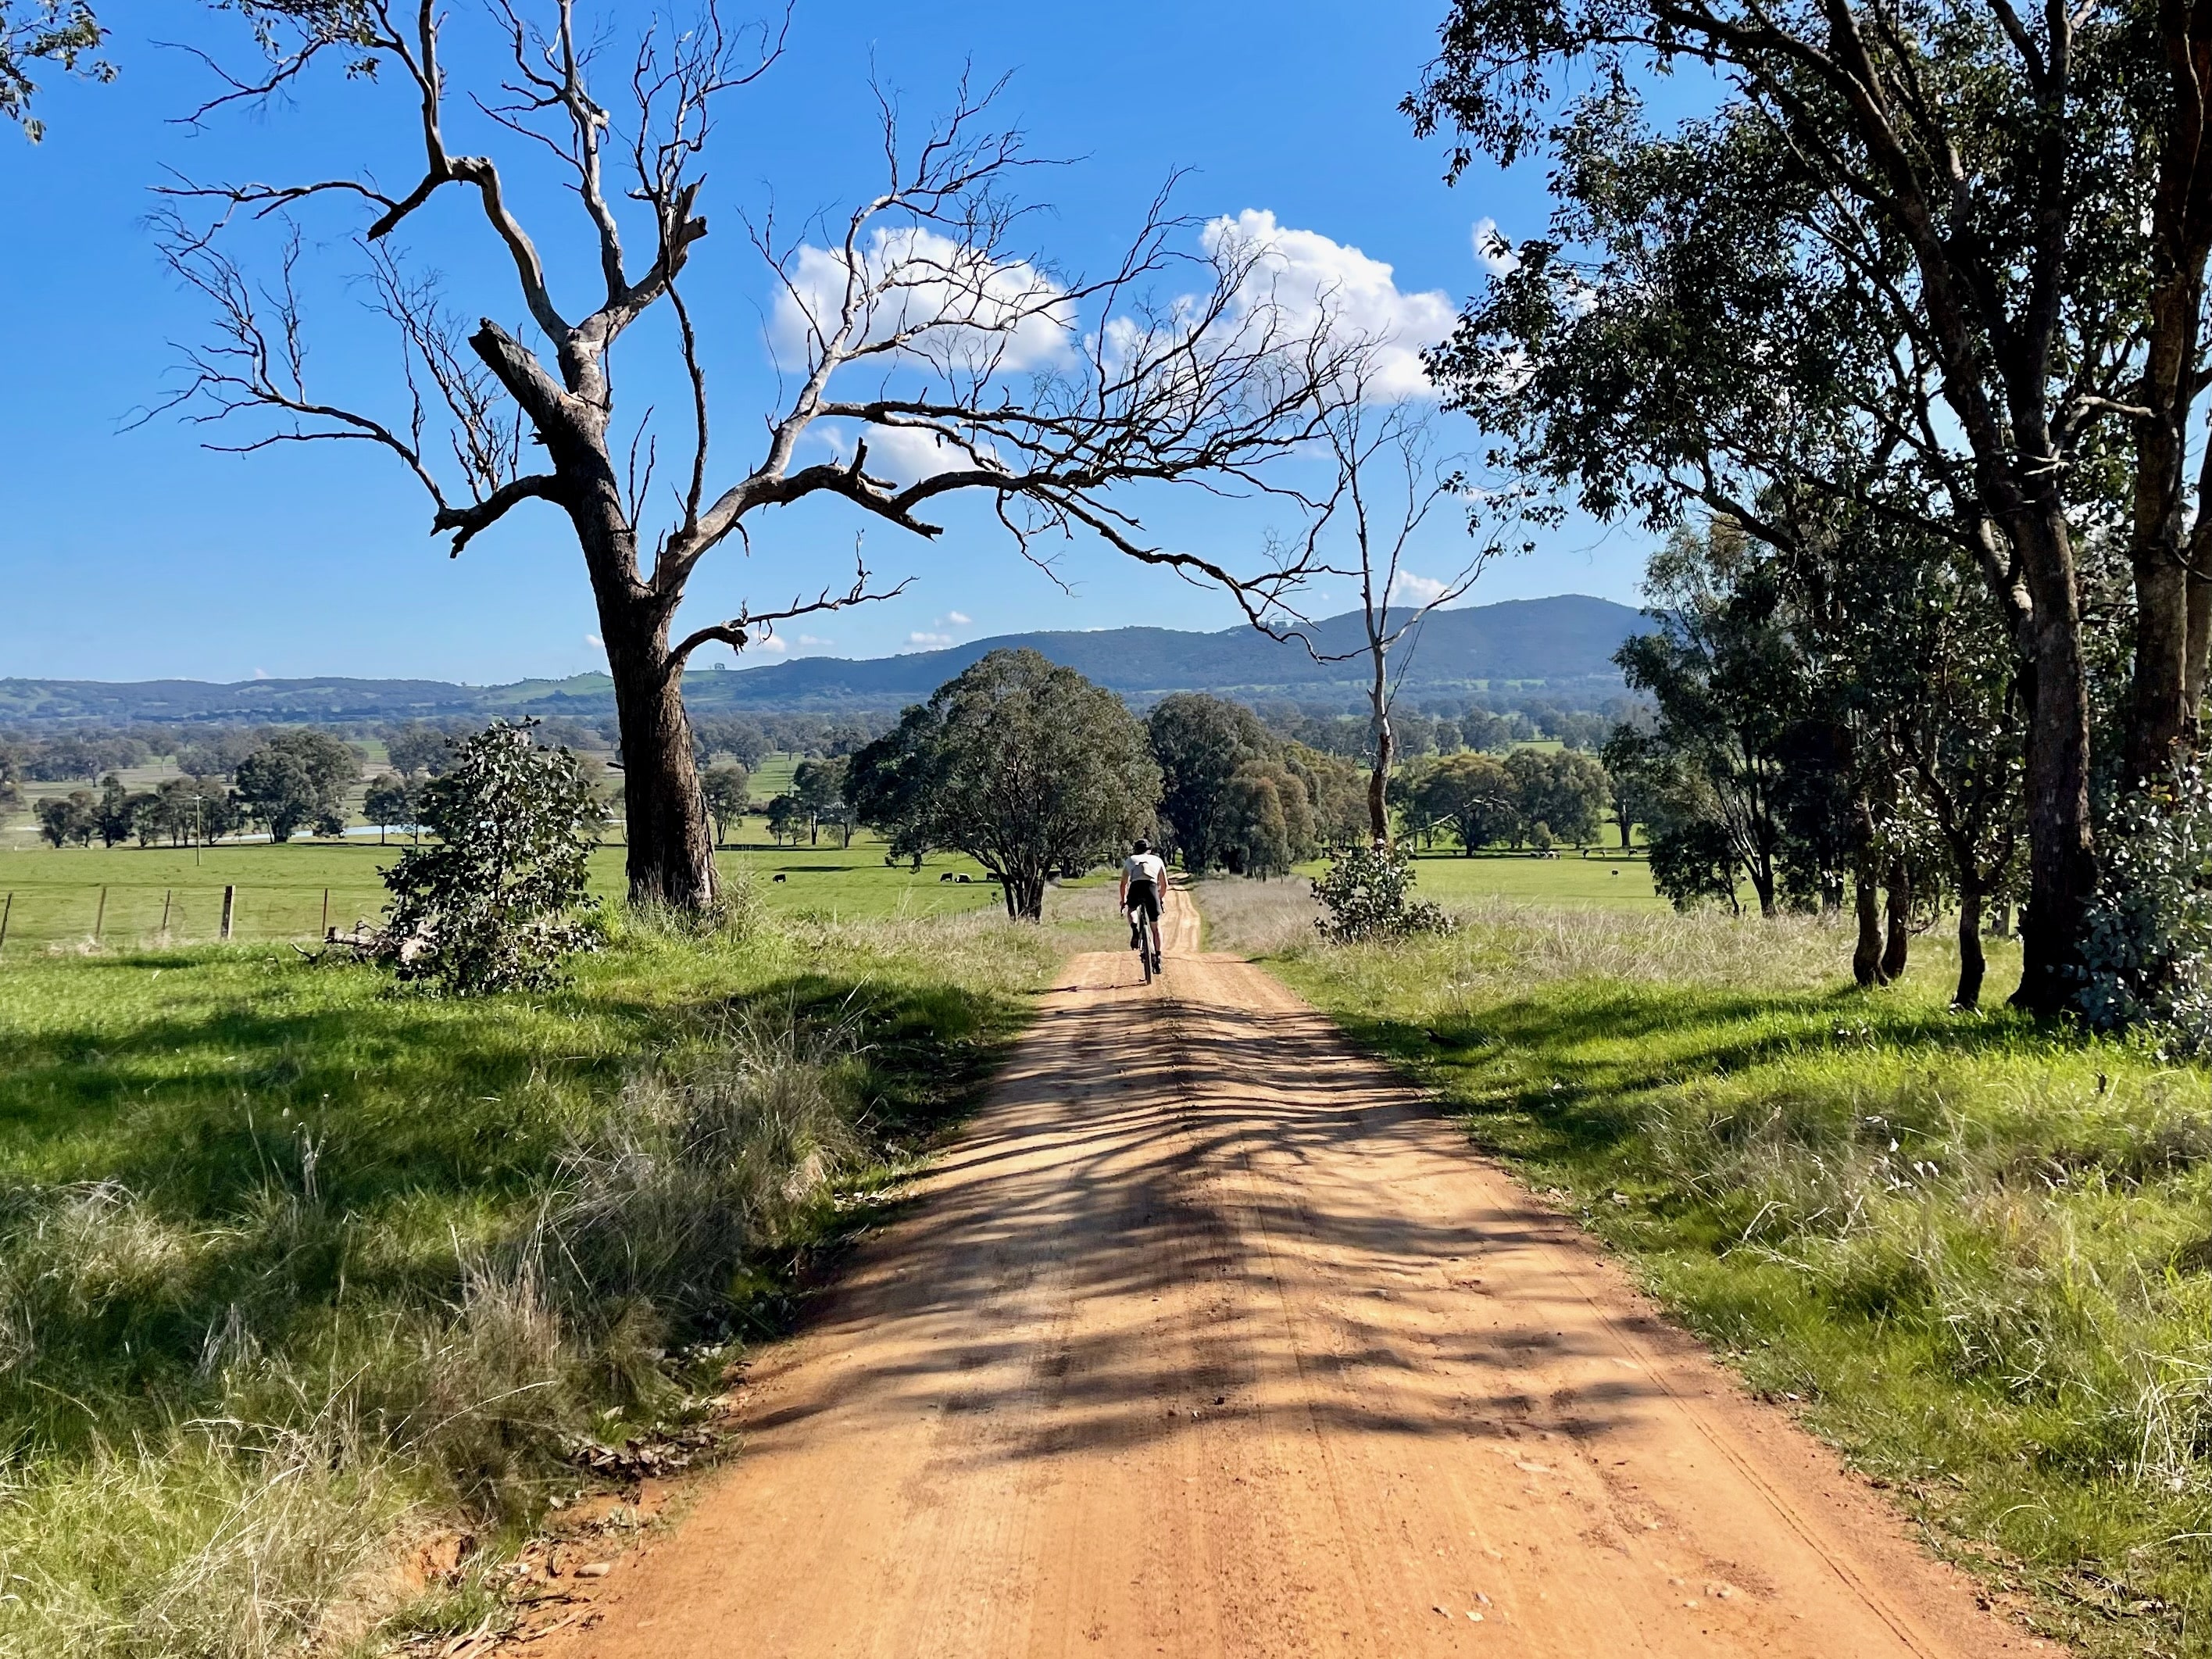 Cyclist riding on smooth gravel road with native trees lining road and a mounatin range in the background